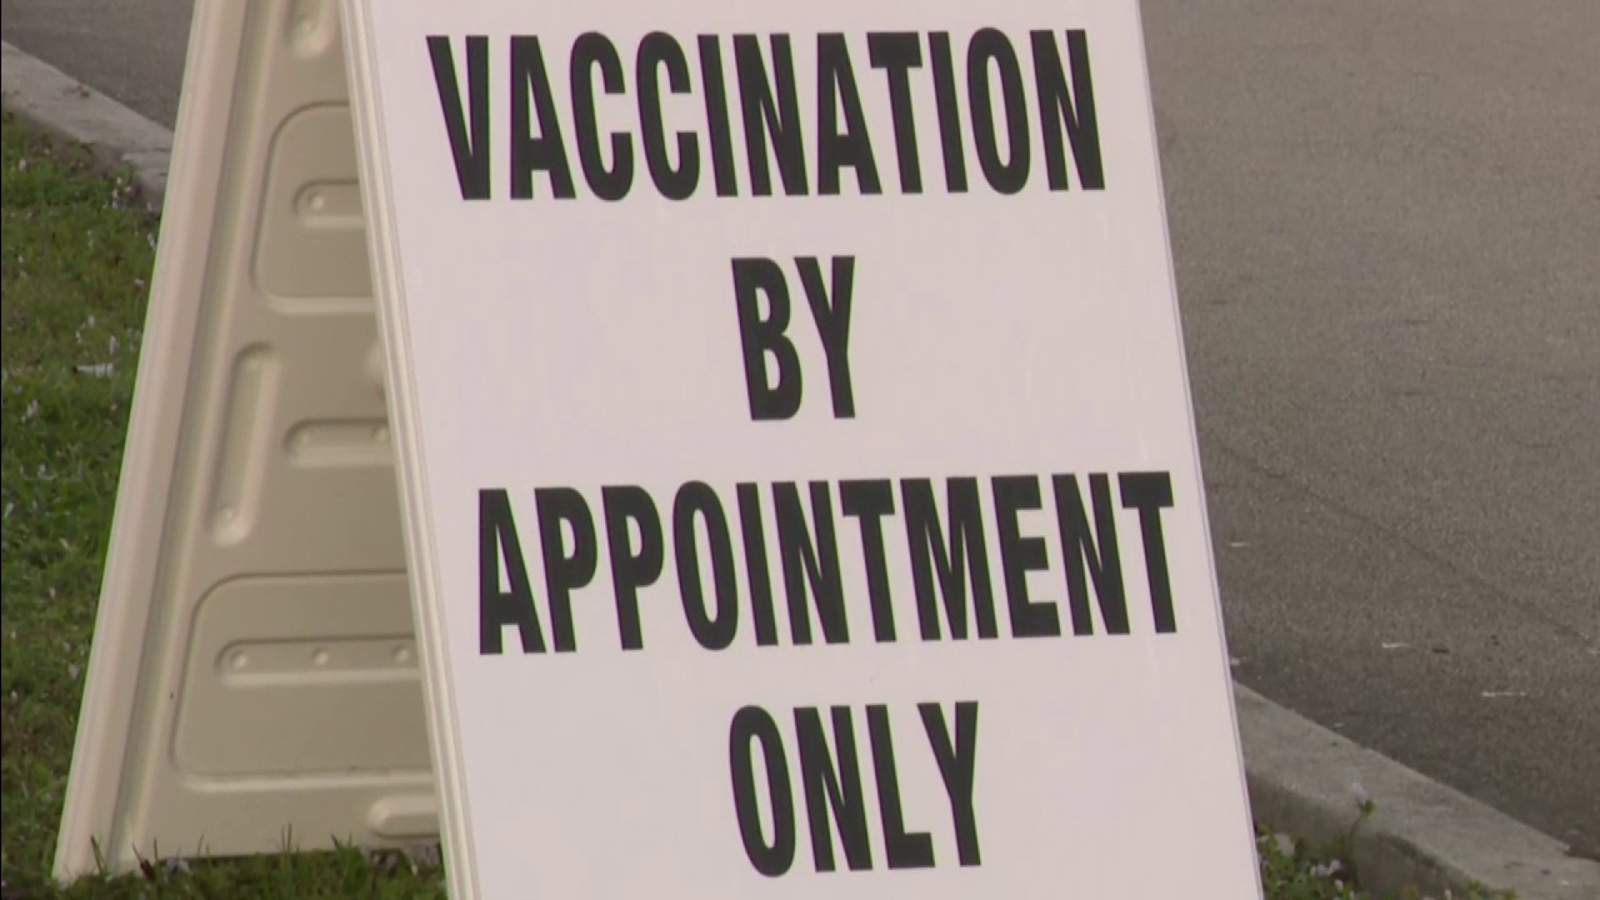 Two drive-through COVID-19 vaccination sites opened Sunday in Broward County, 3rd opens Tuesday